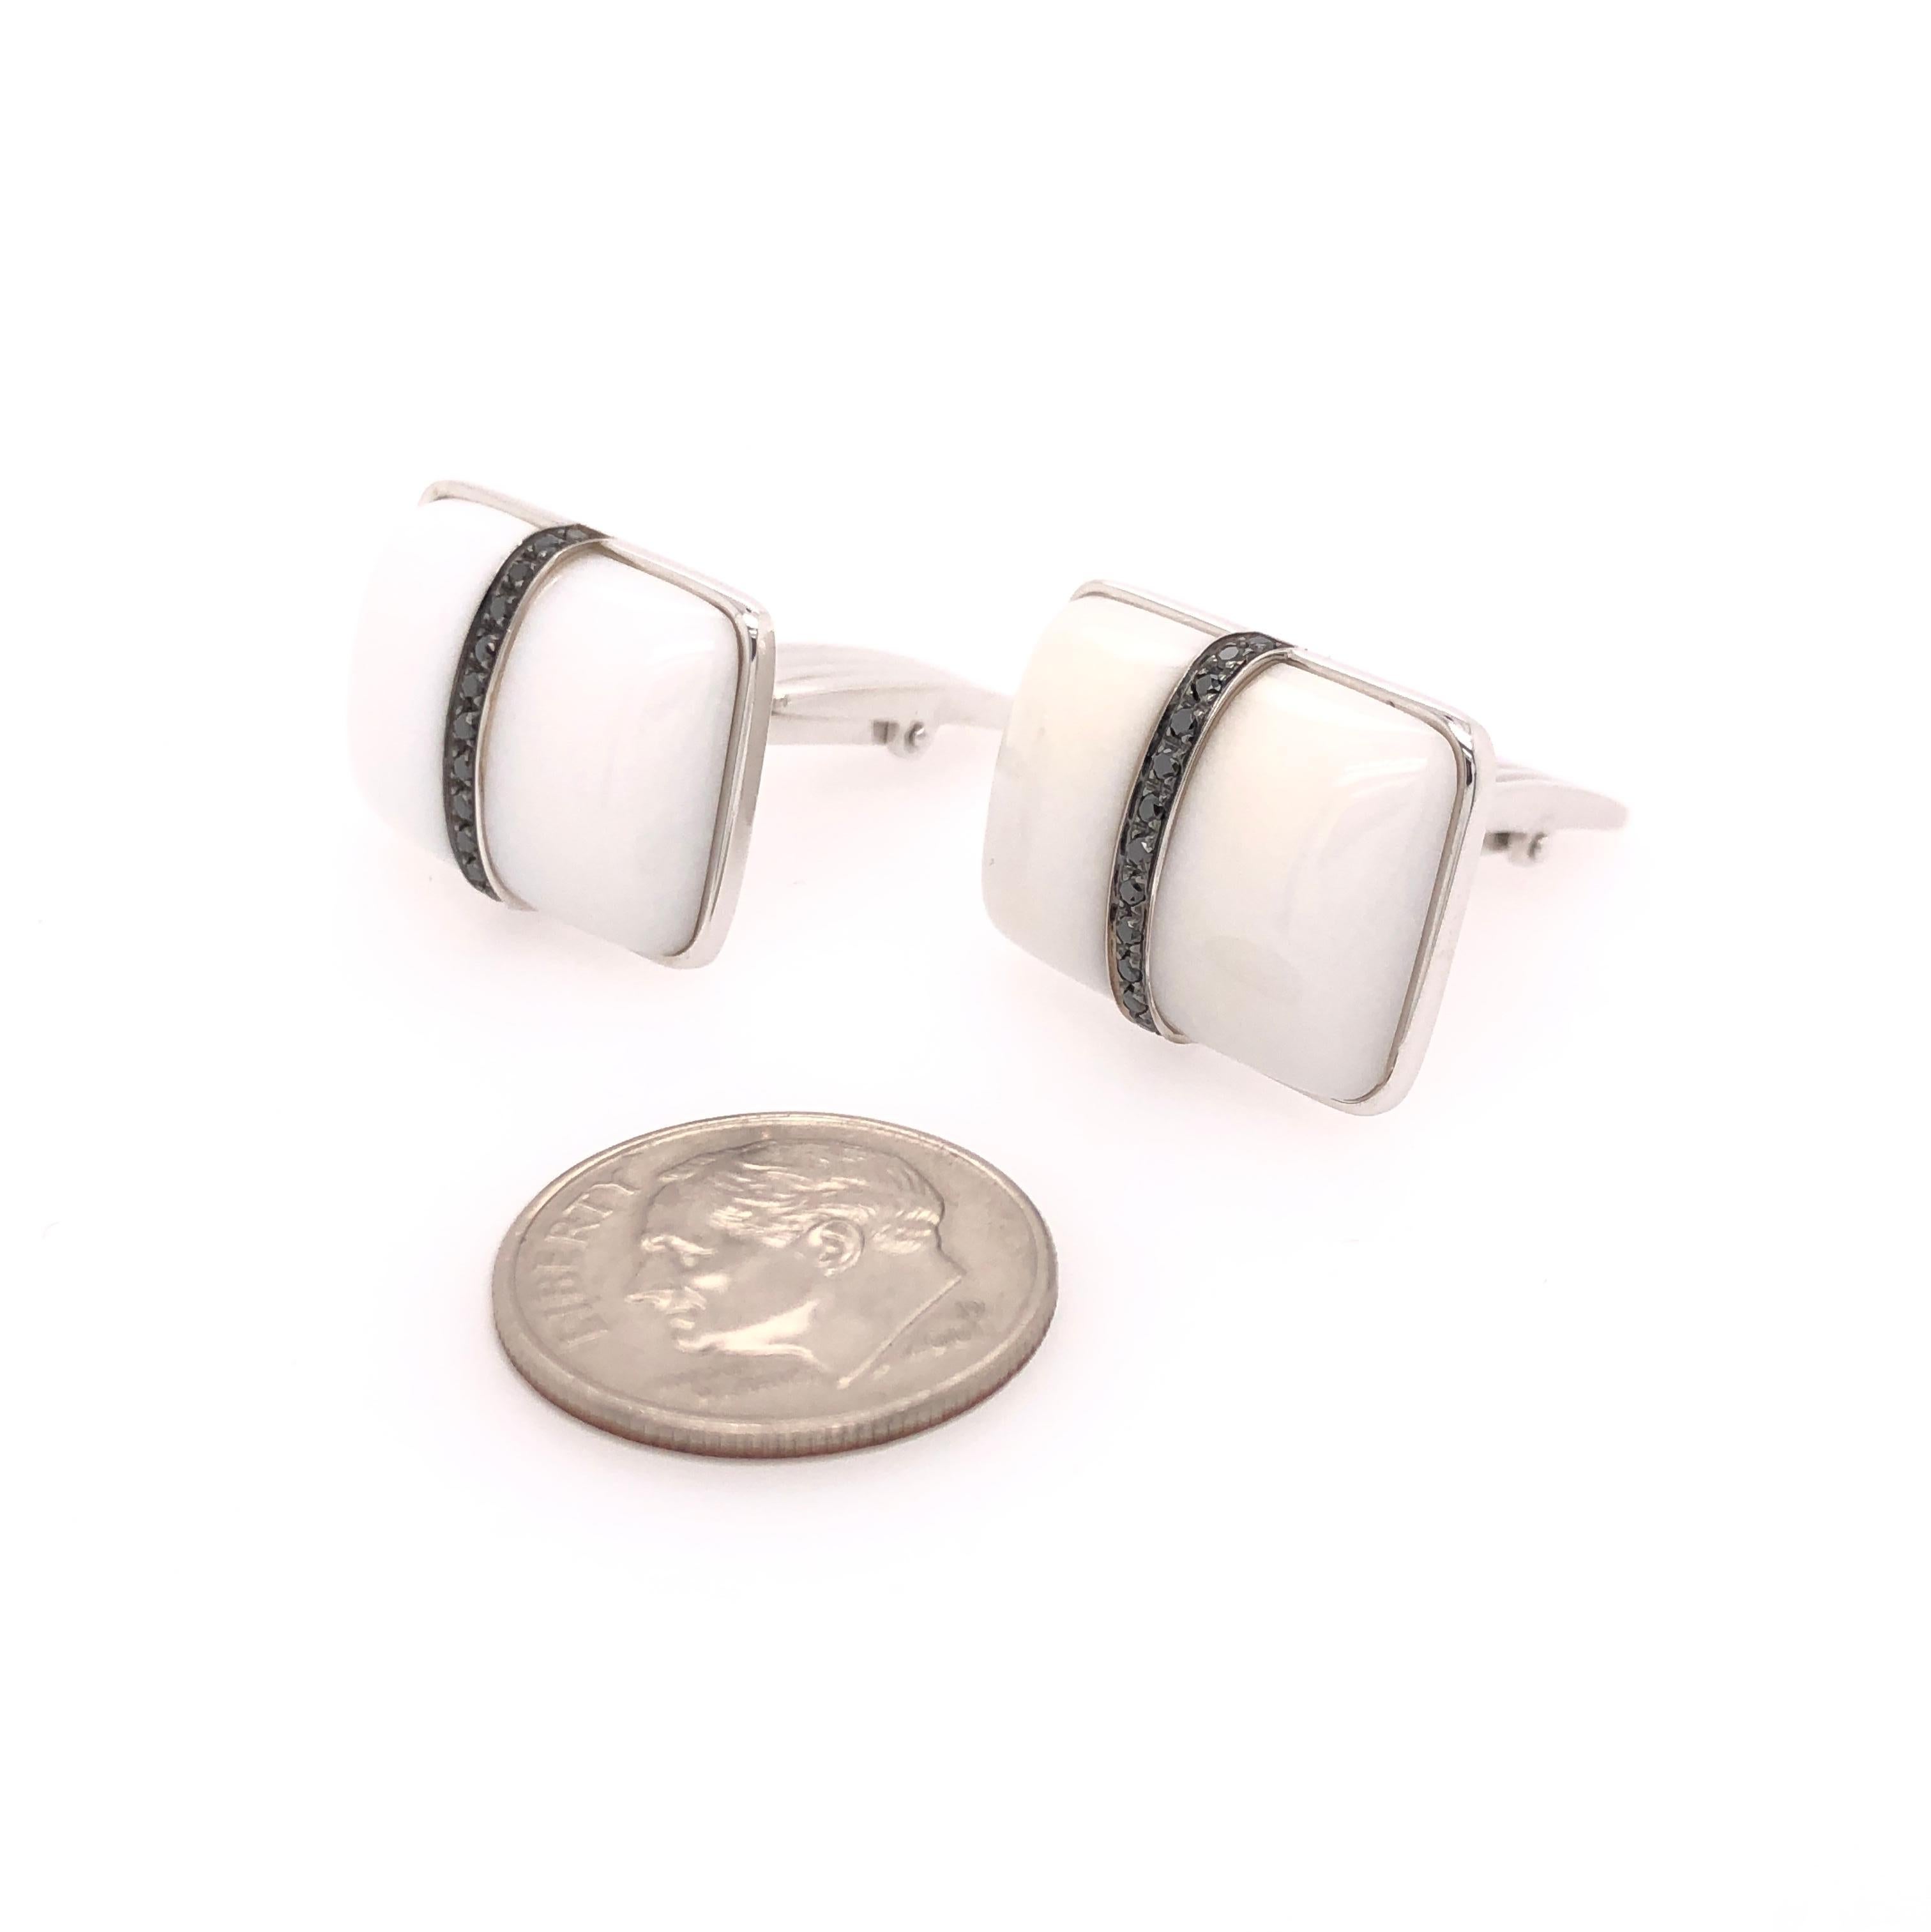 Dress in Style with Orianne Collins 18K White Gold White Agate and Black Diamond Cufflinks.  Stamped Orianne Collins Jewellery on the back.  
